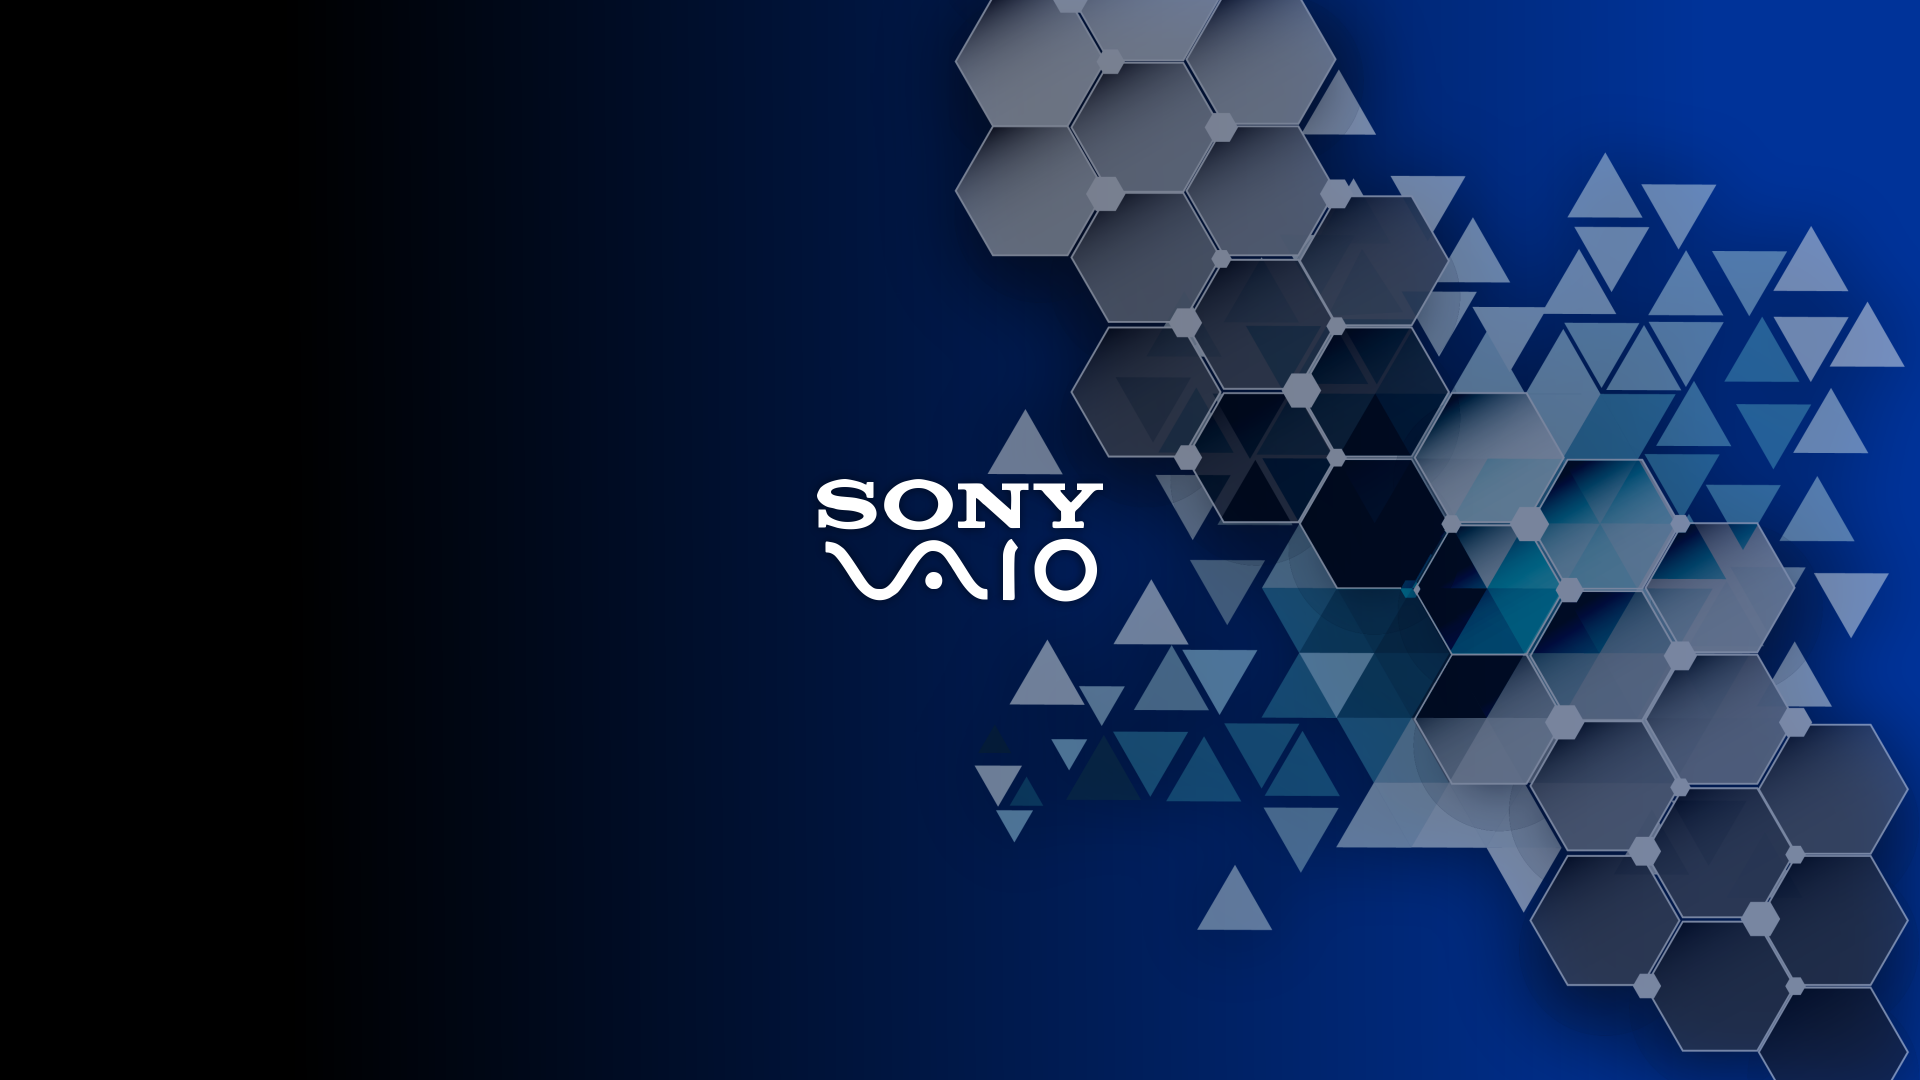 15 Beautiful 1080p HD wallpapers for the Sony Xperia Z2